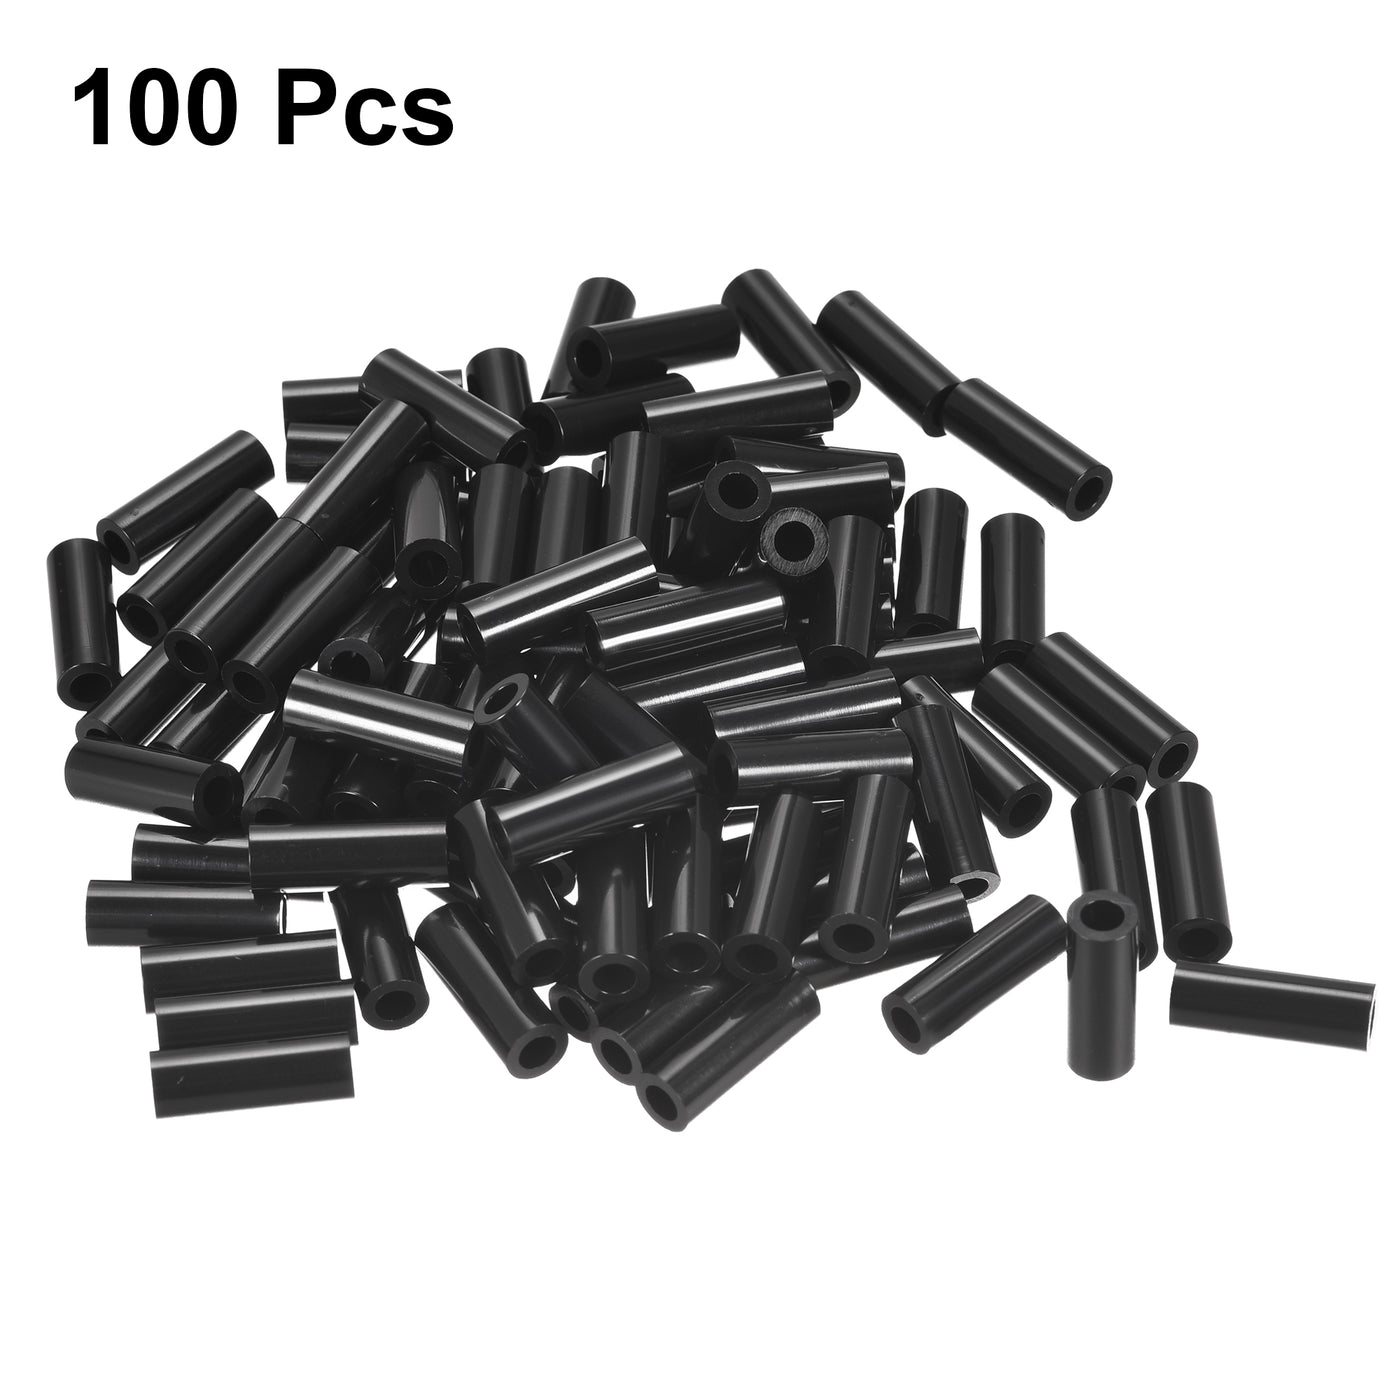 uxcell Uxcell Nylon Round Spacer Washer 4.2mmx7mmx15mm for M4 Screws Black 100Pcs